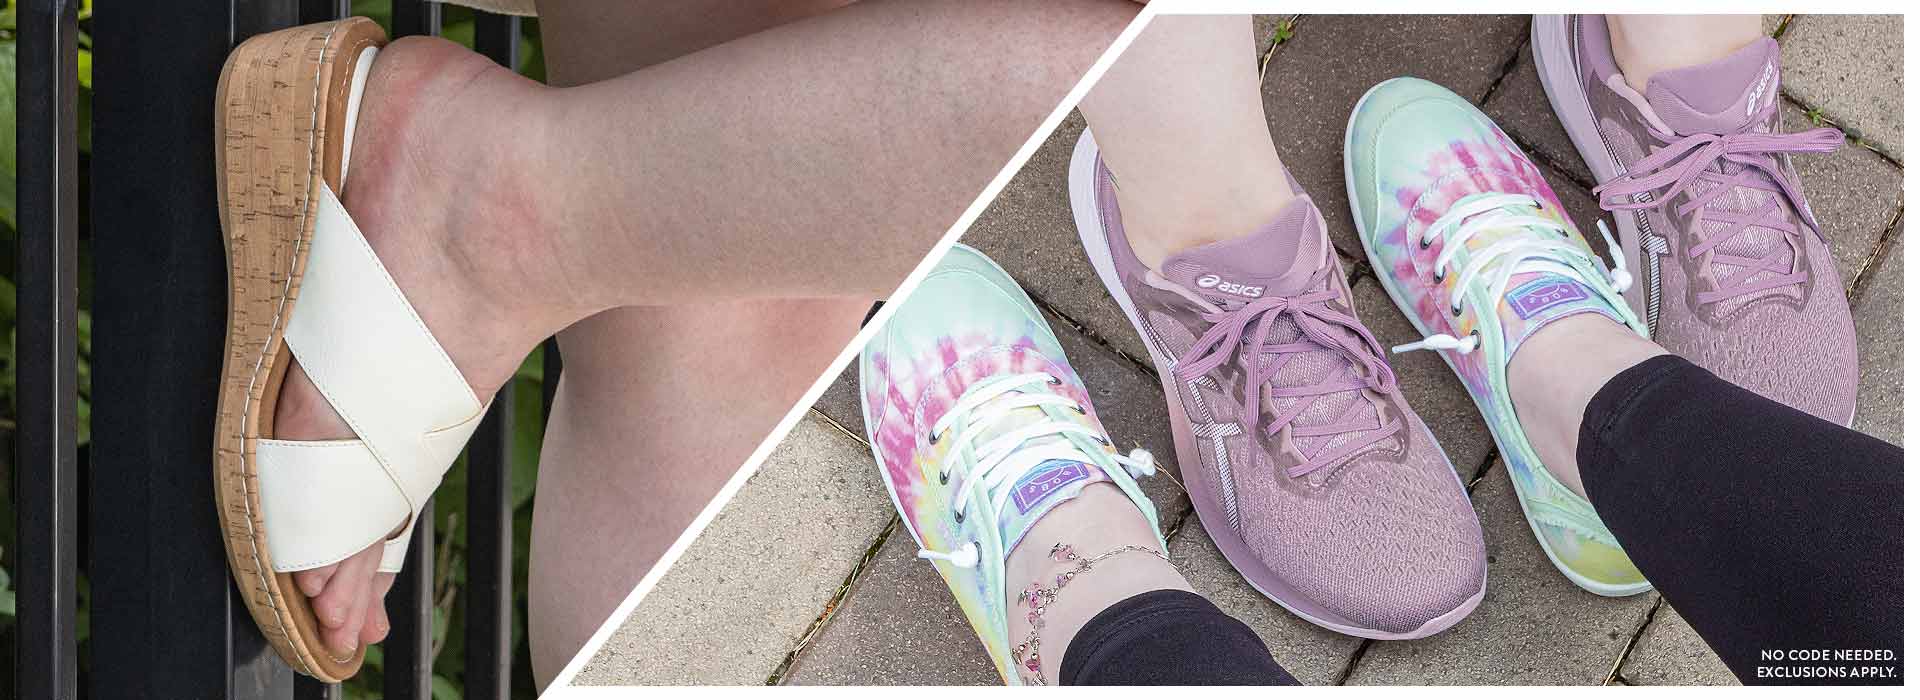 Women's Week! Savings on Athletic Shoes, Casual Shoes, Sandals and More!